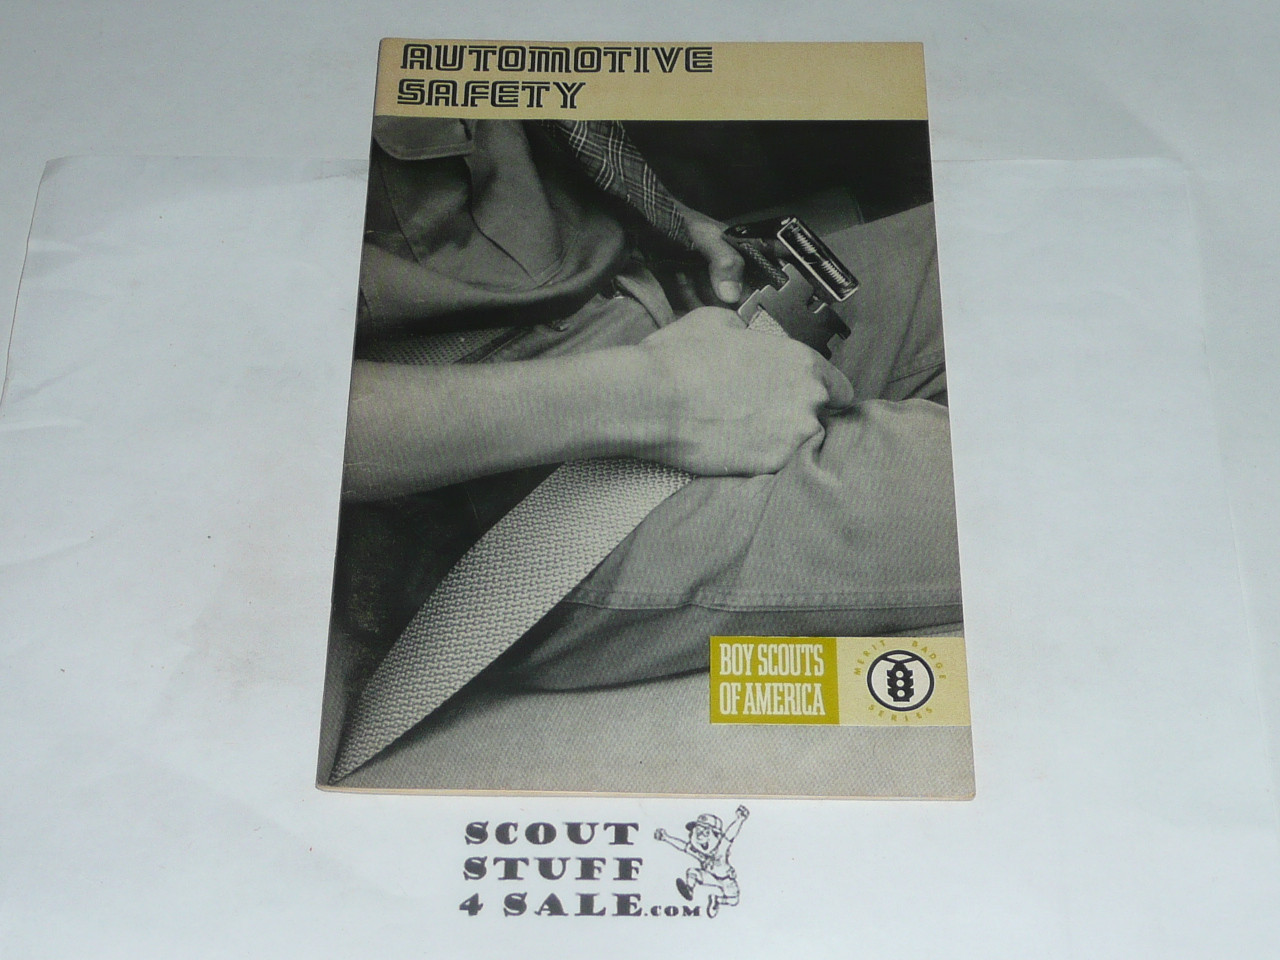 Automotive Safety Merit Badge Pamphlet, Type 8, Green Band Cover, 5-73 Printing